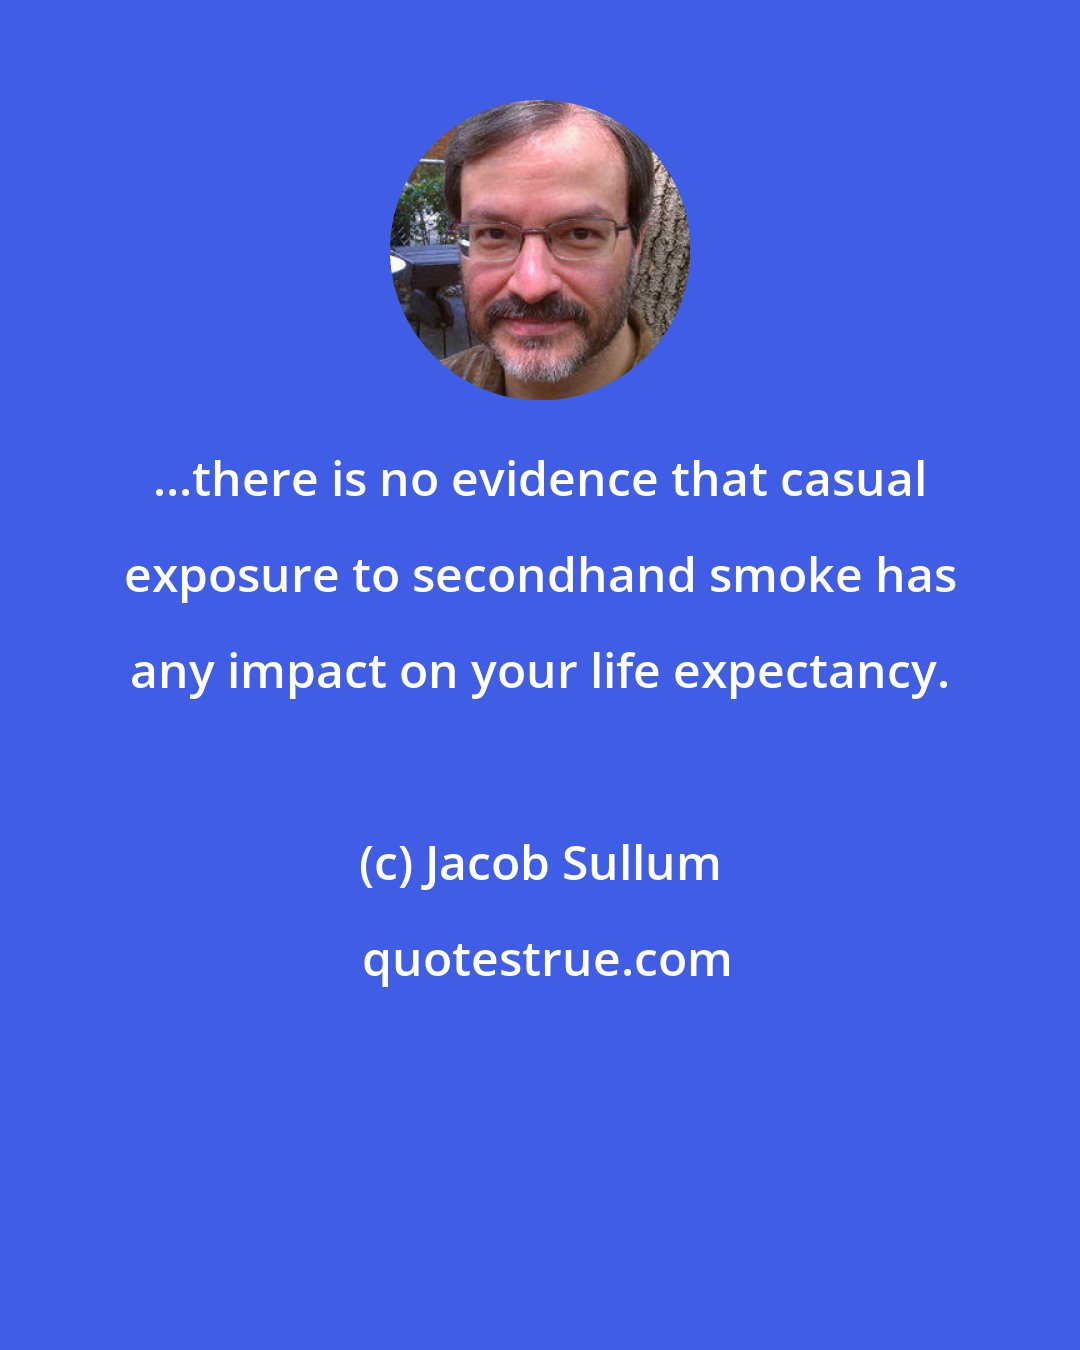 Jacob Sullum: ...there is no evidence that casual exposure to secondhand smoke has any impact on your life expectancy.